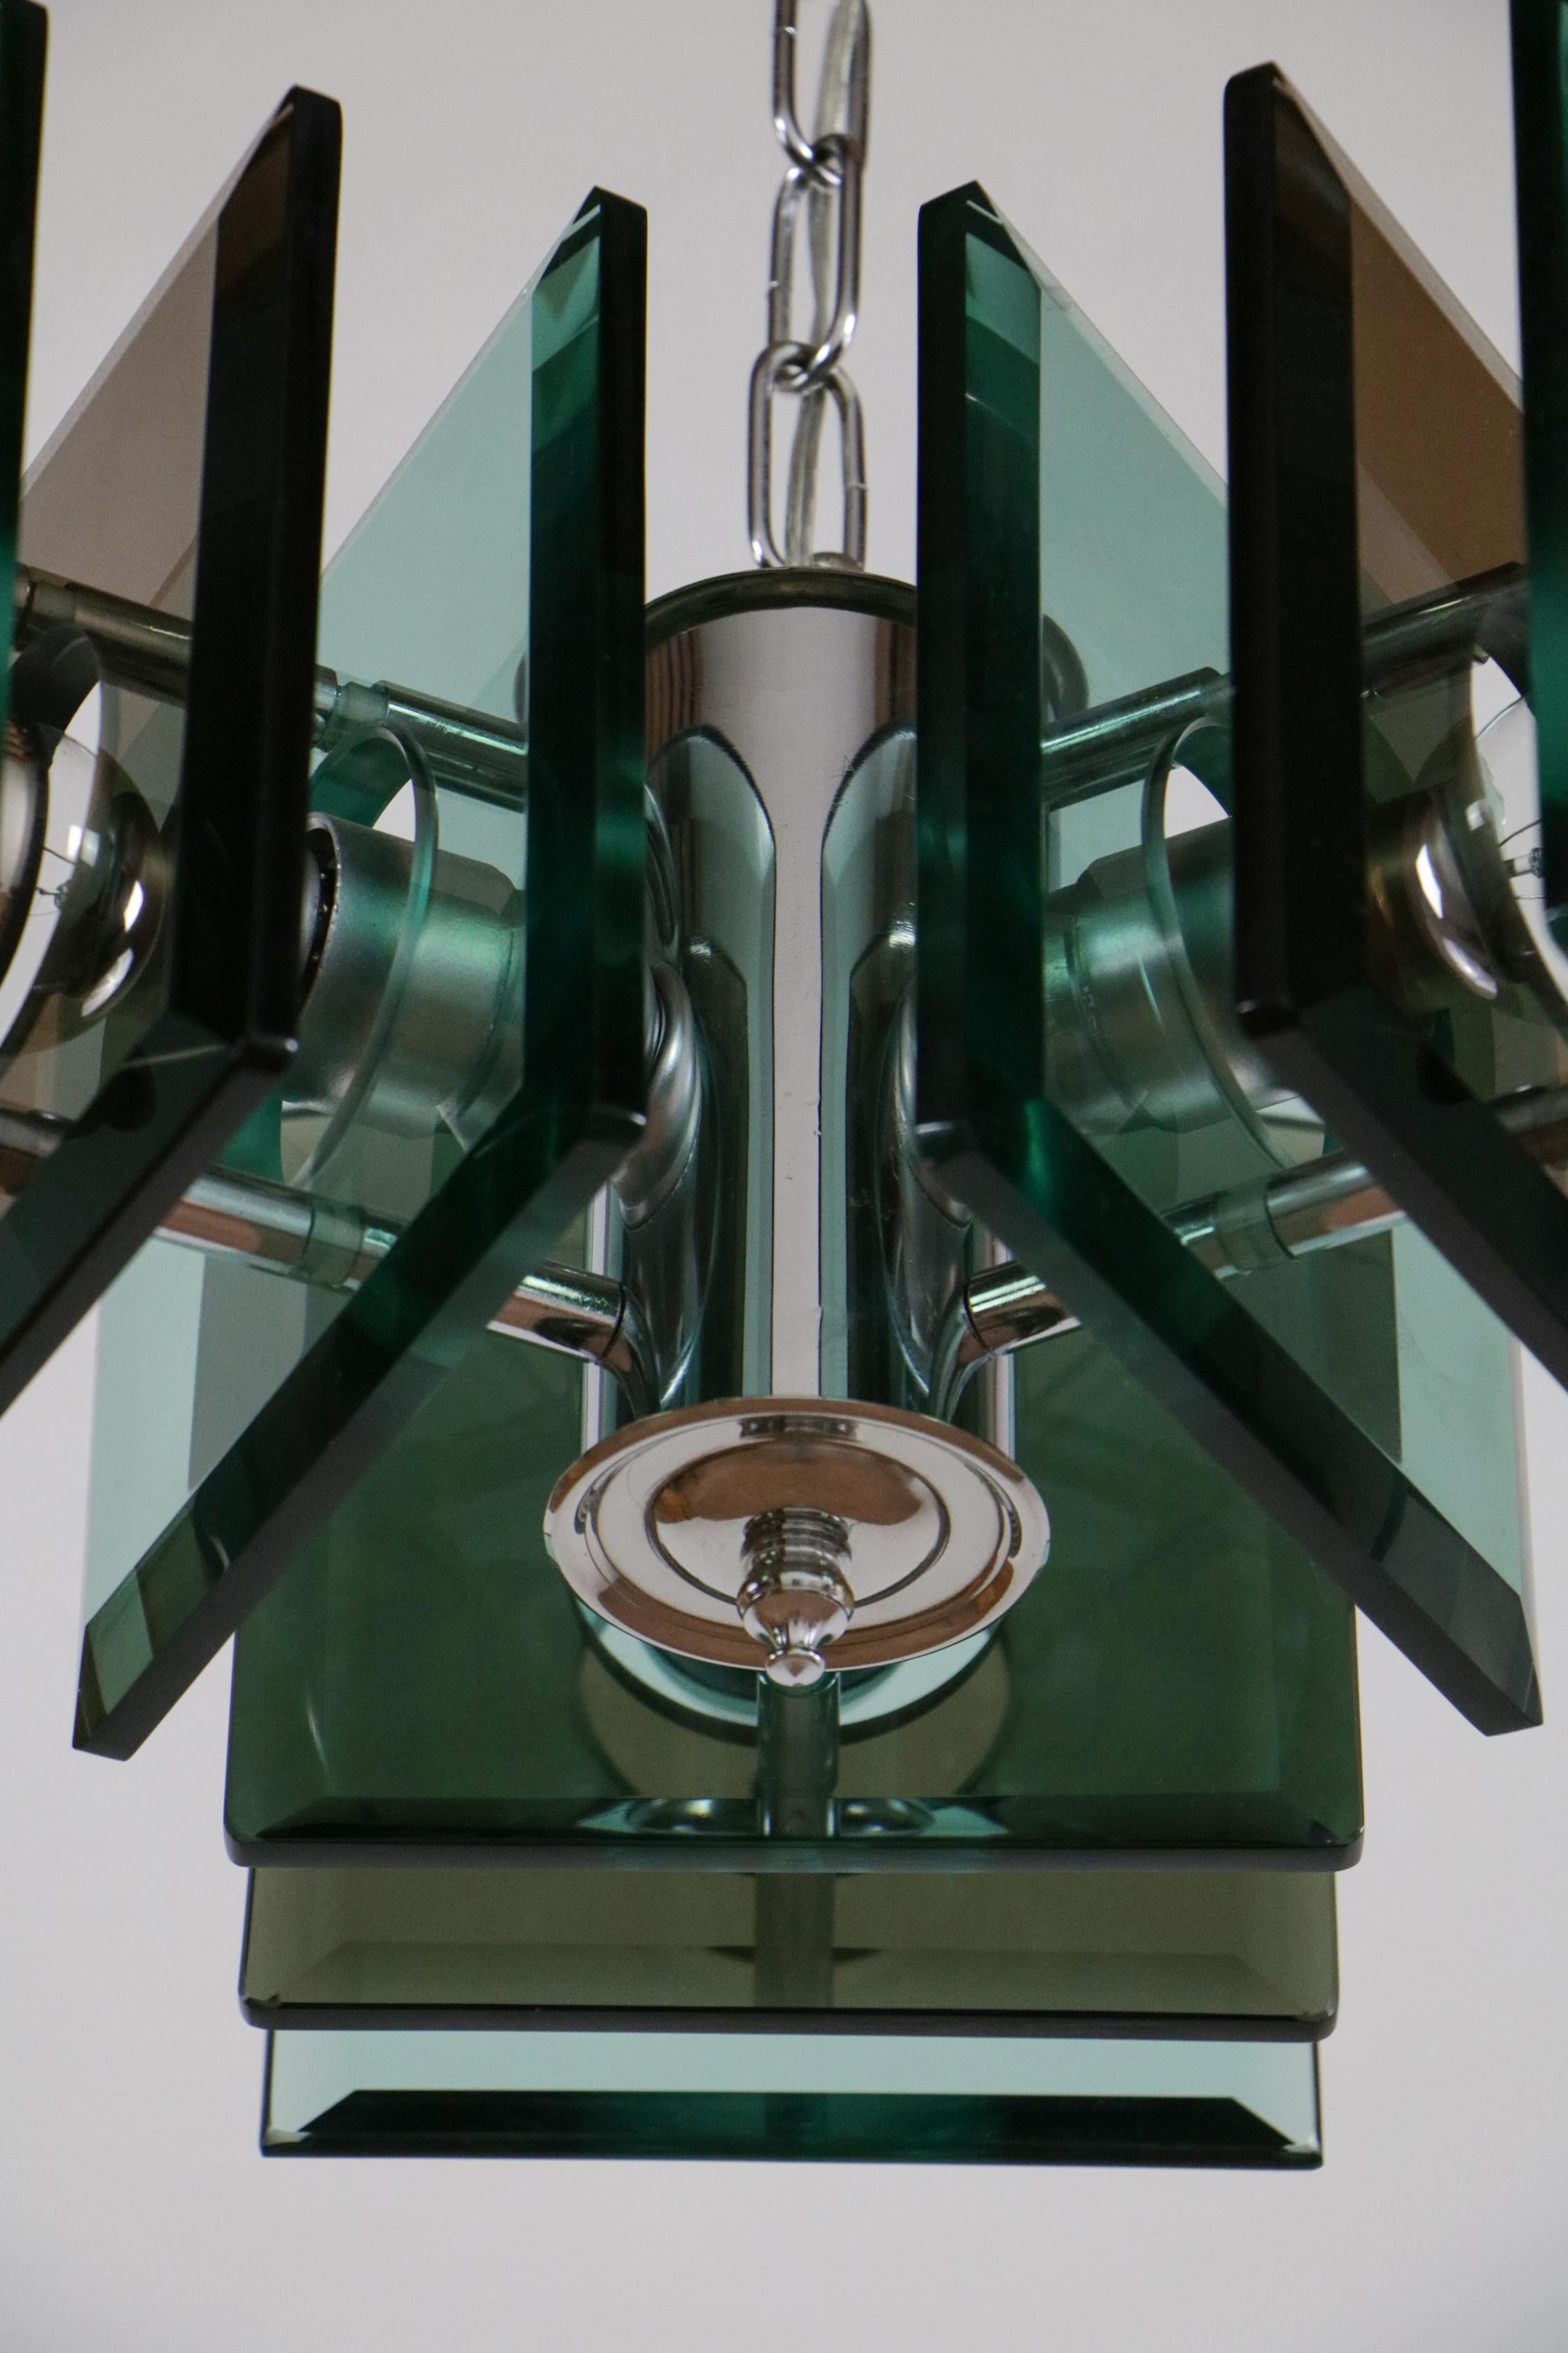 Brass Italian Space Age Square Green Color Chandelier by Lupi Cristal Luxor, 1950s For Sale